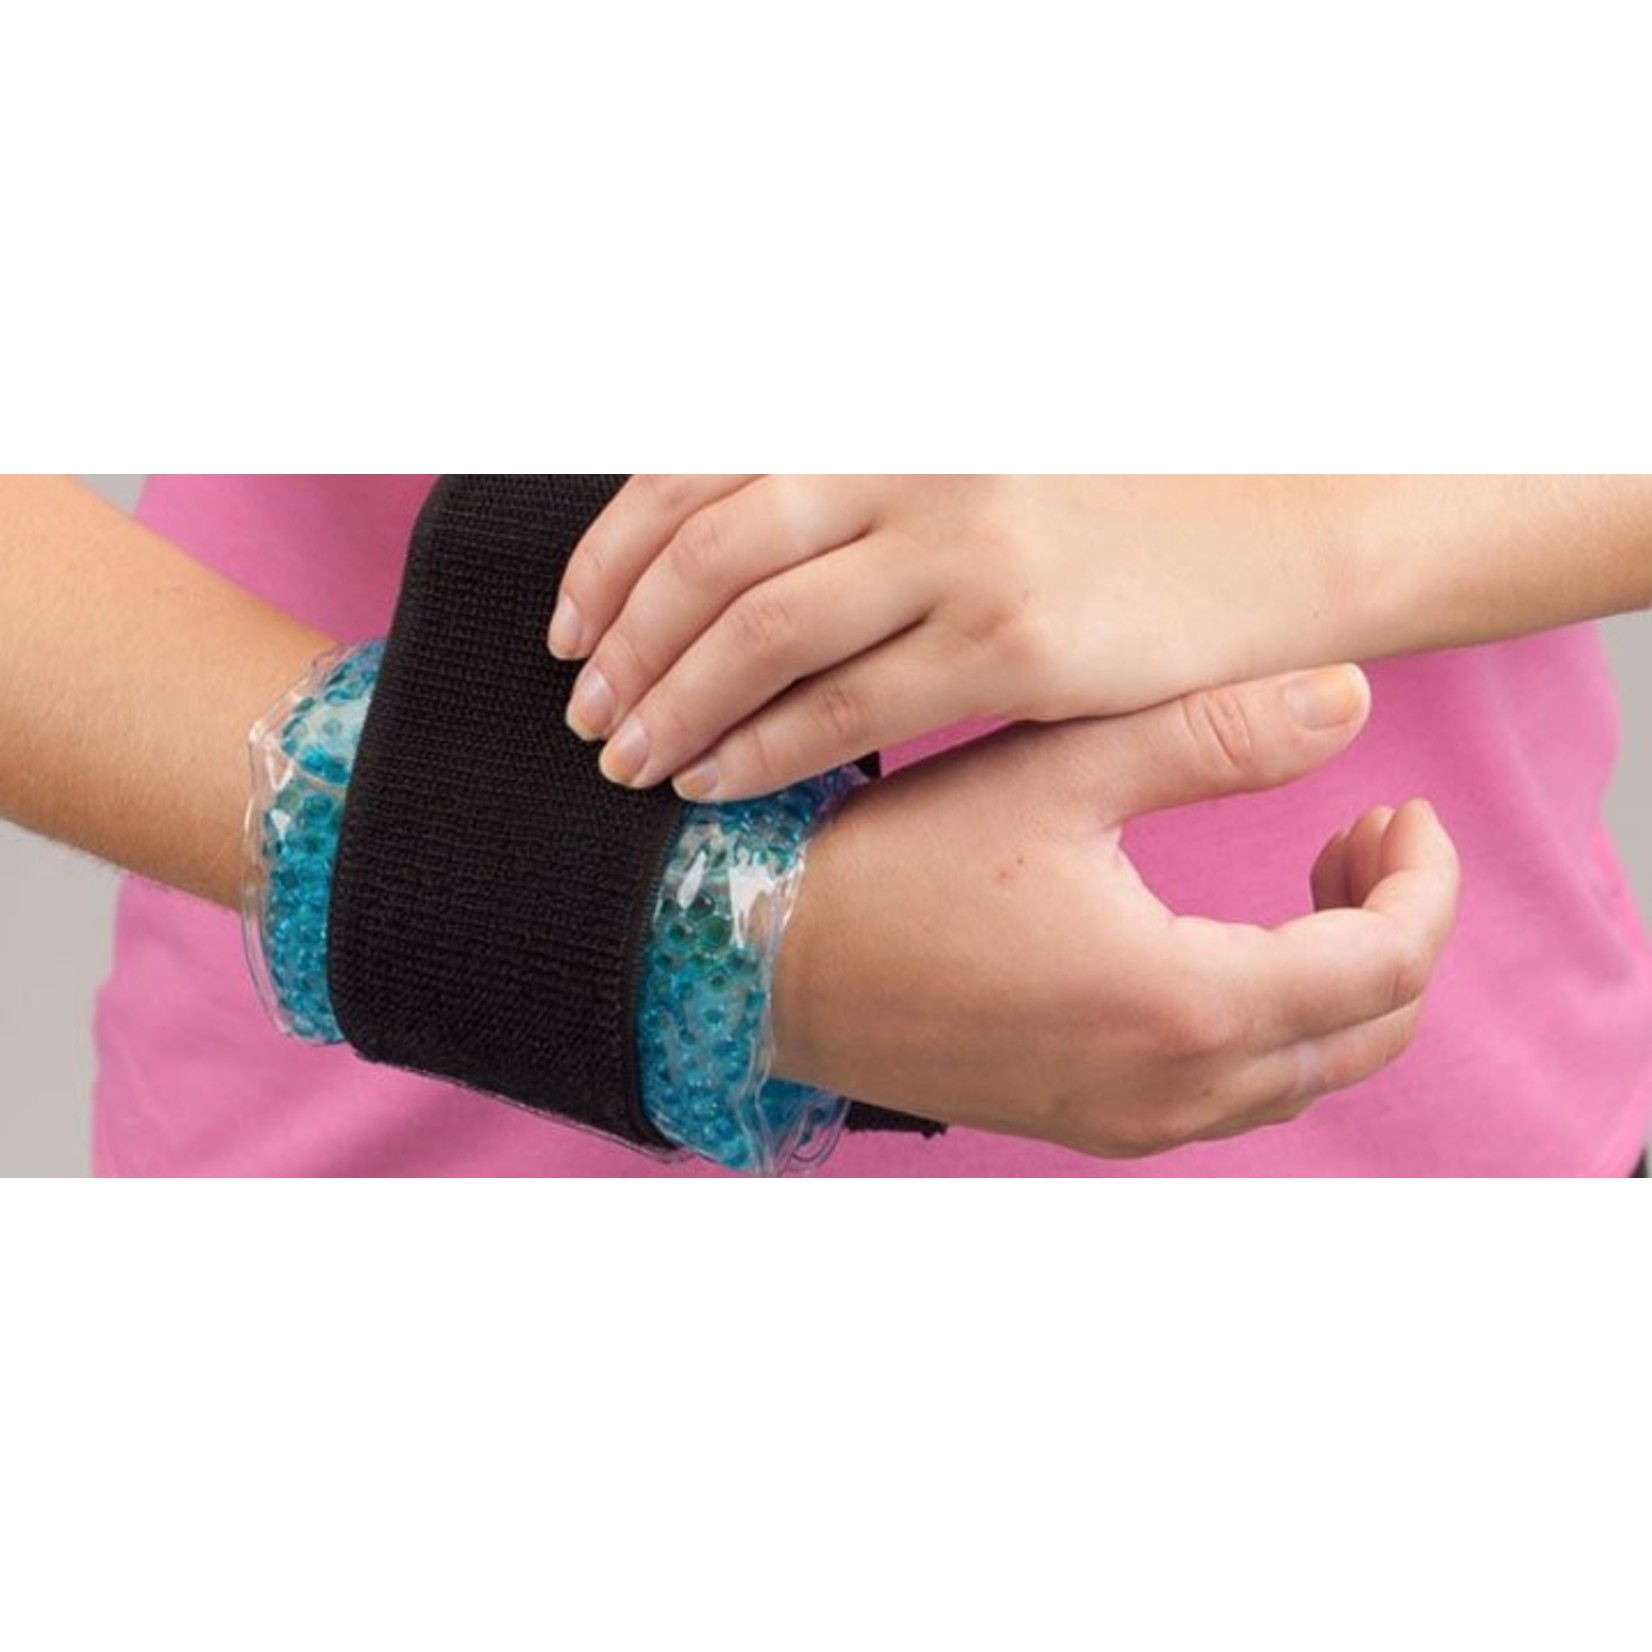 Performance Health Thera-Pearl Ankle/Wrist Wrap